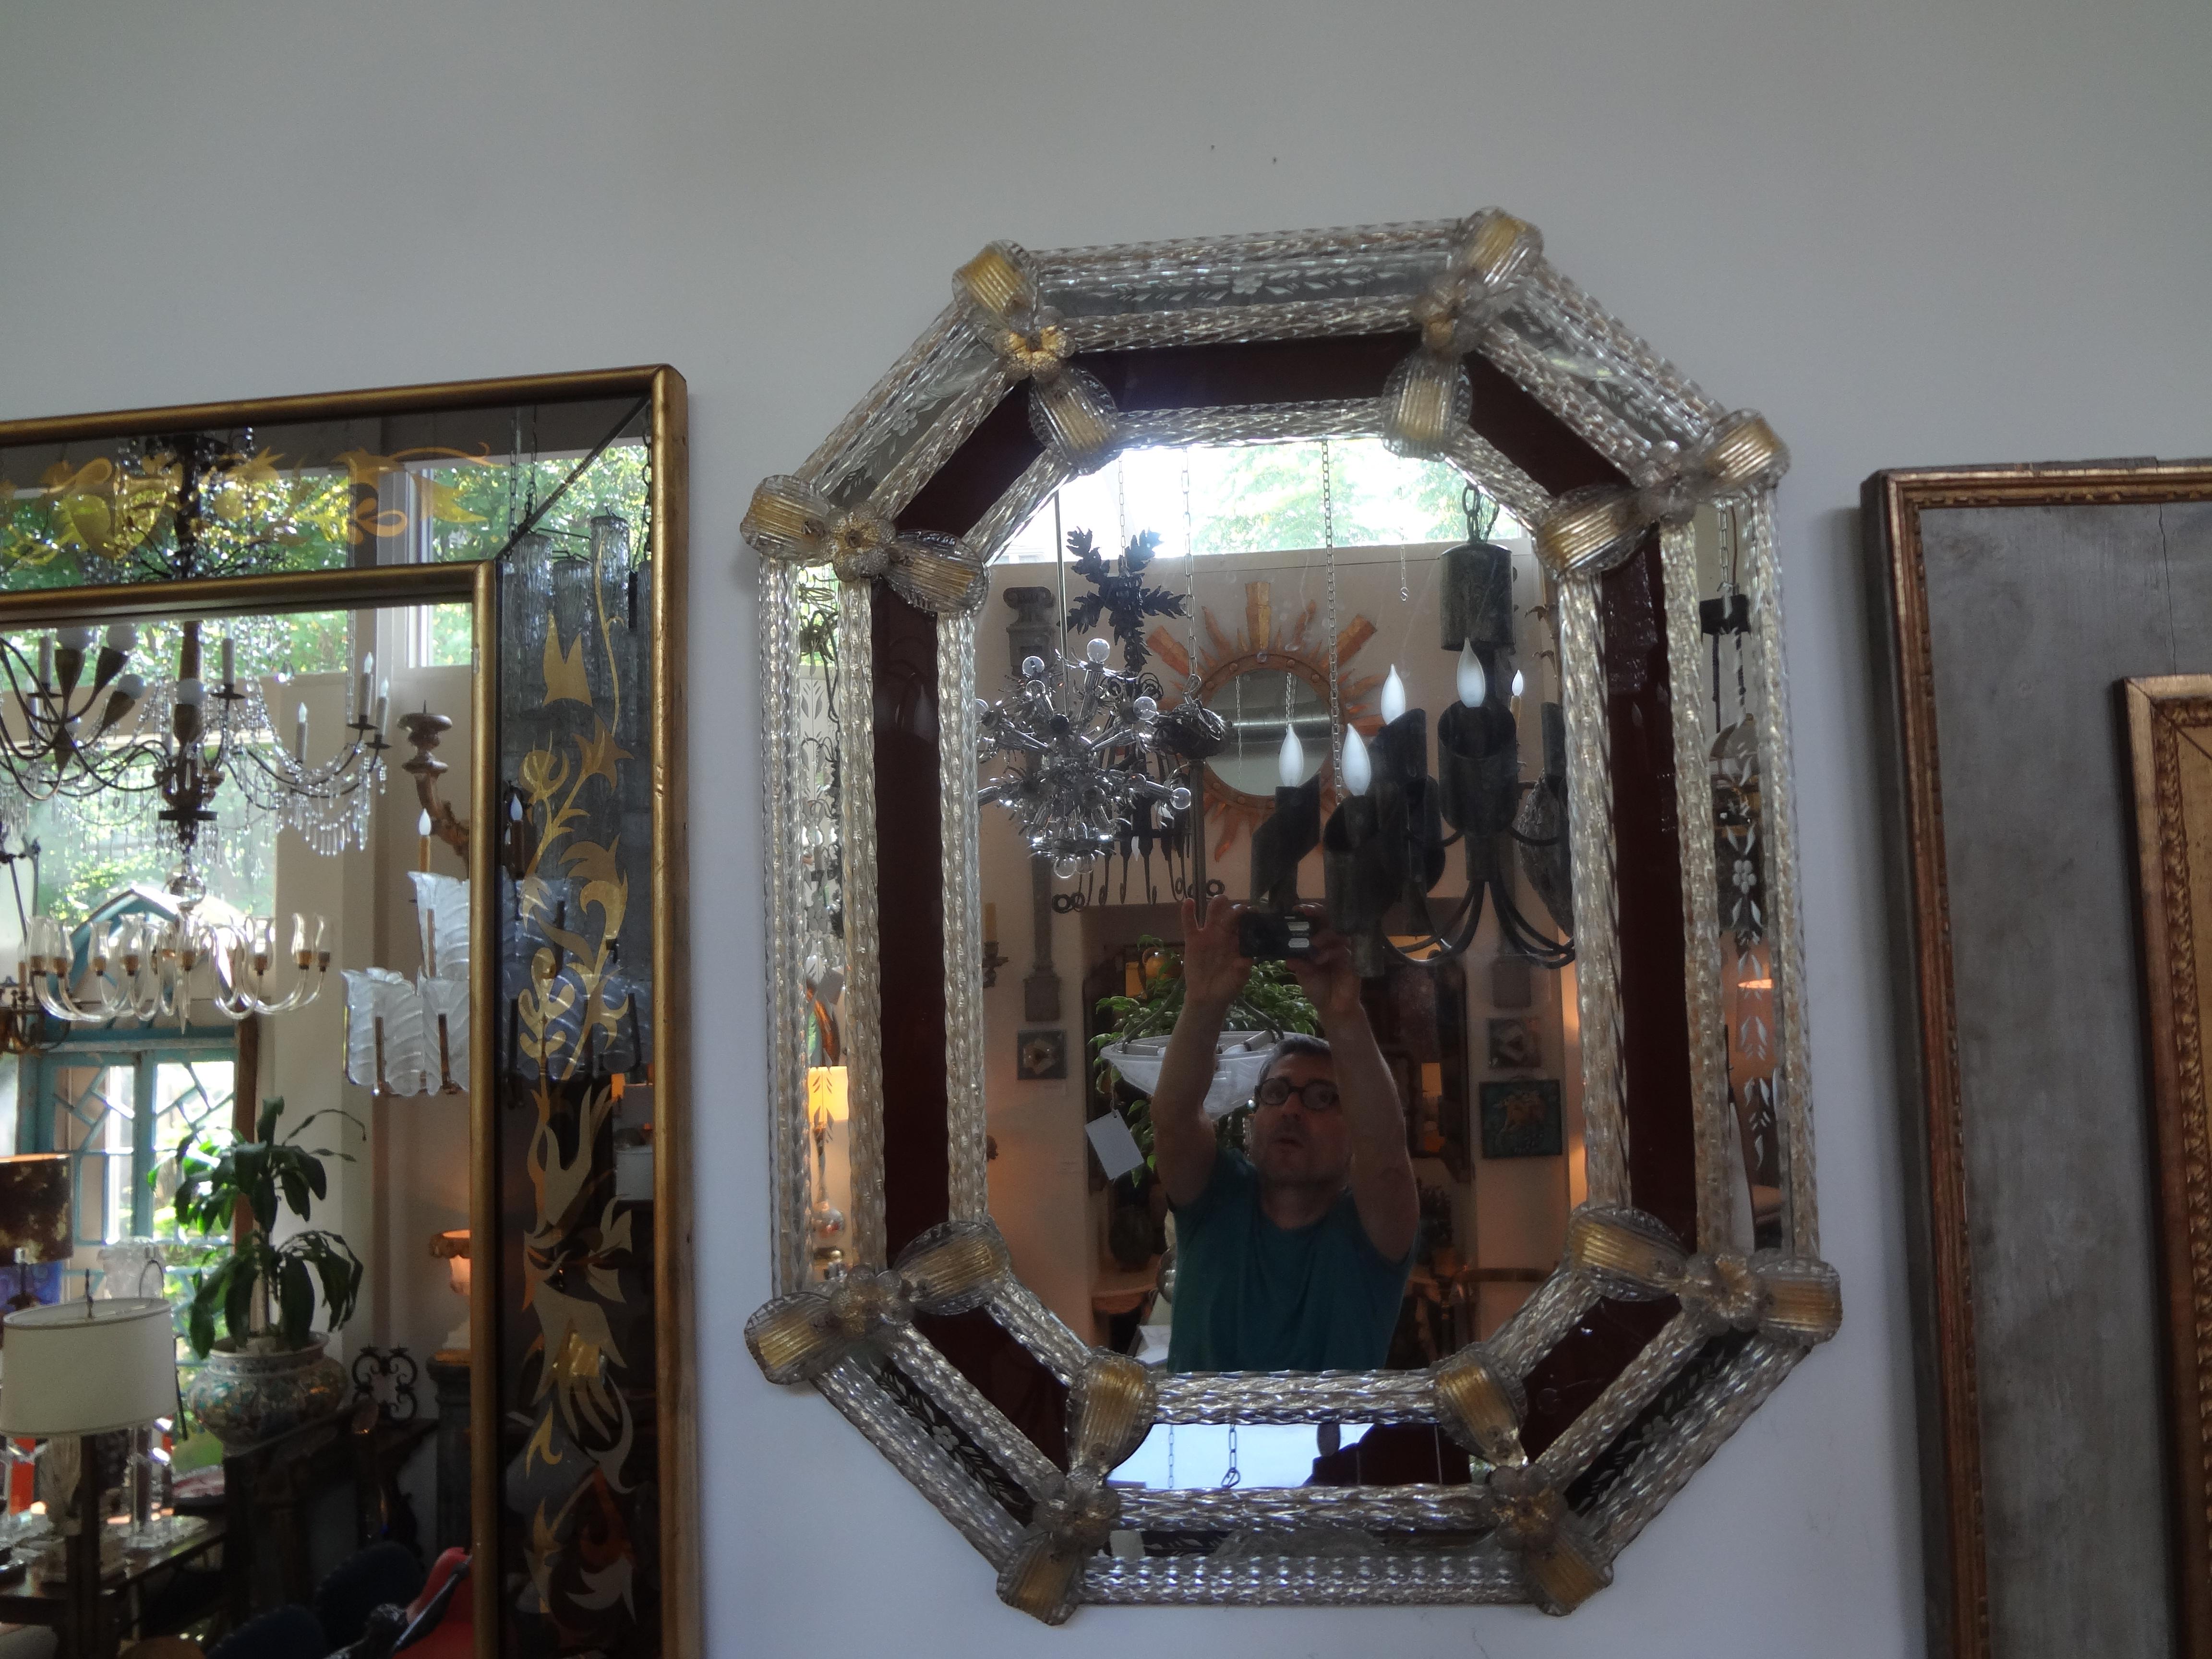 Lovely octagon Venetian mirror with burgundy or maroon and etched glass panels. This Italian Venetian mirror is the perfect size for a powder room or hall.